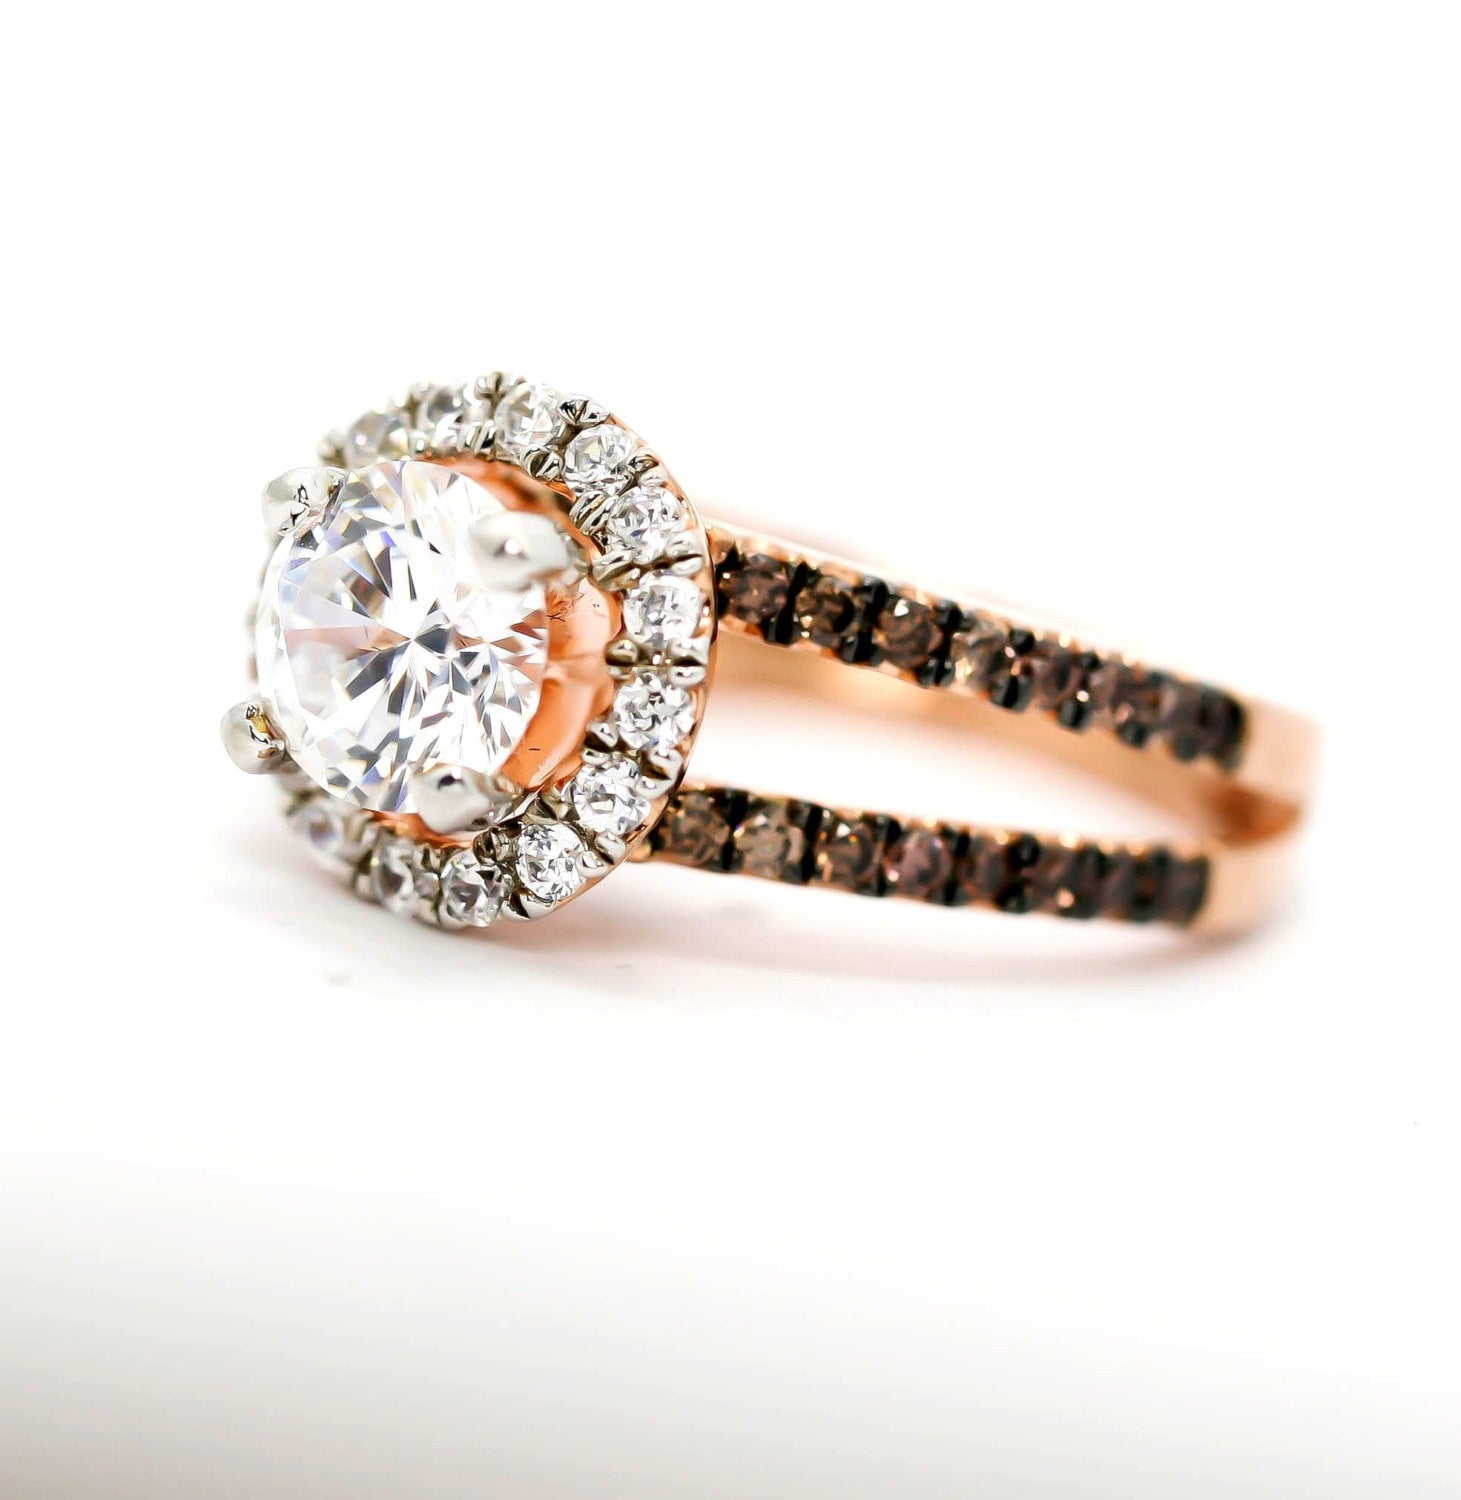 Floating Halo Rose Gold, 1.25 Carat Forever Brilliant Moissanite Engagement Ring With 1.02 Carats Of White & Brown Diamonds, Anniversary Ring - FB94654